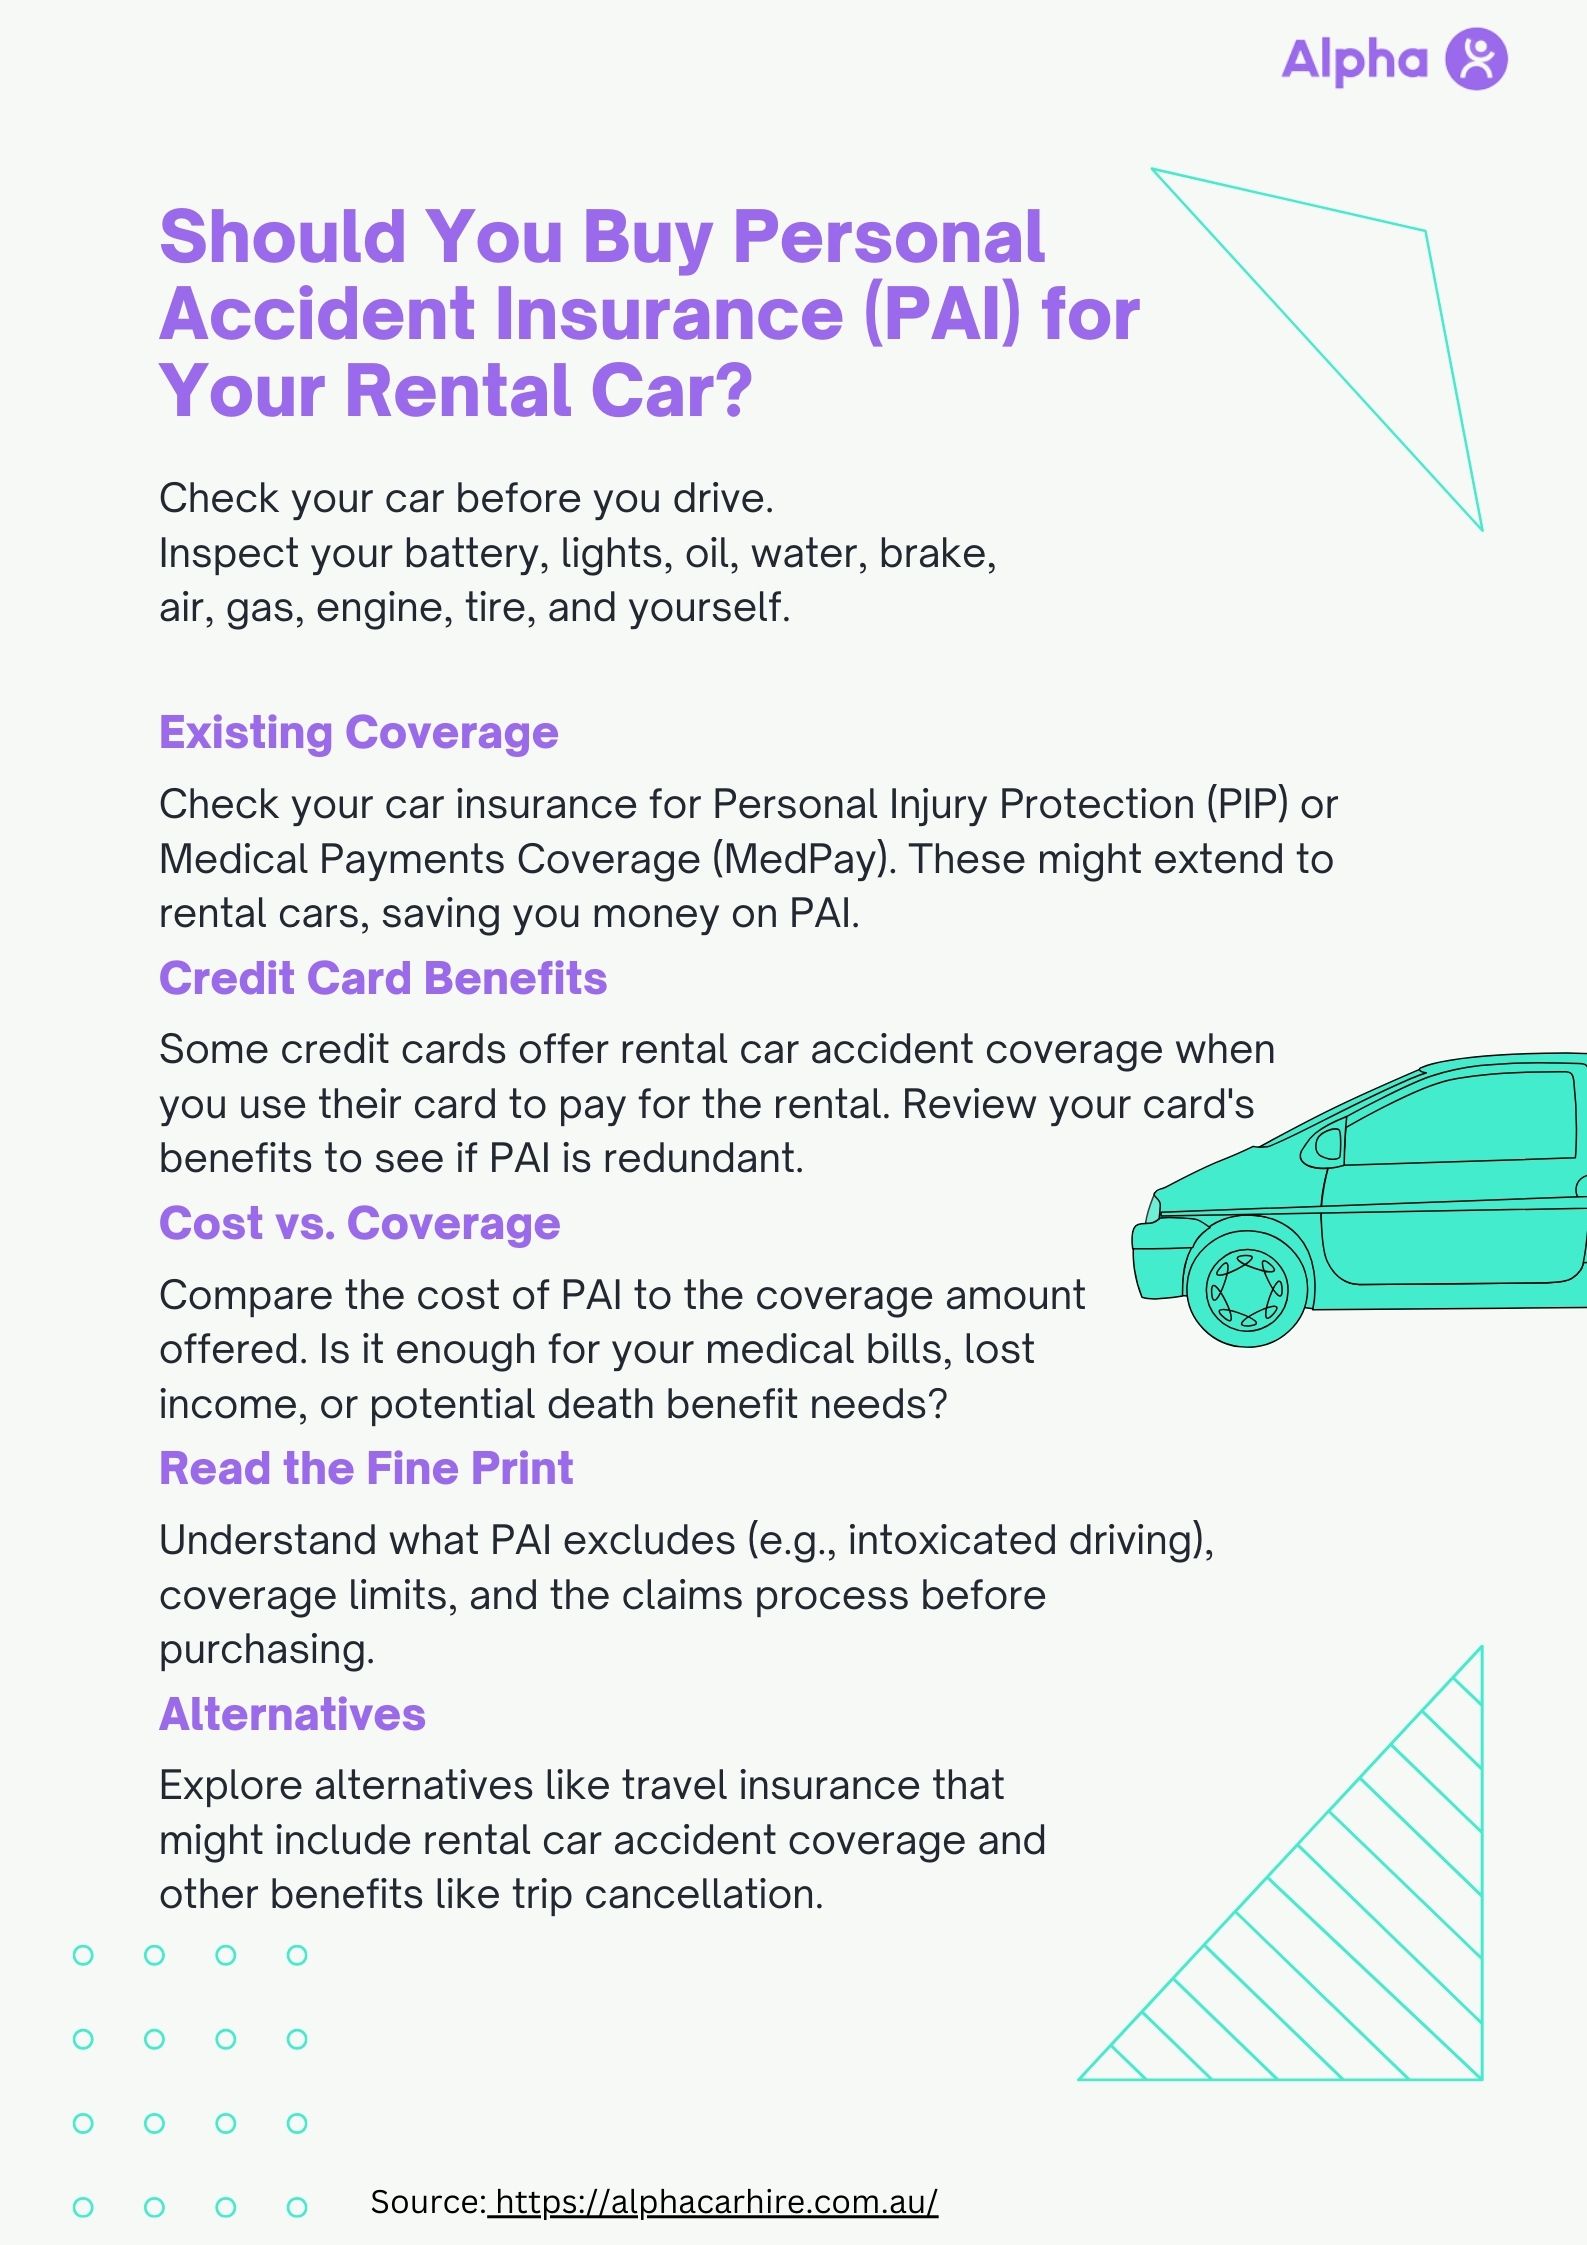 personal-accident-insurance-for-rental-cars-infographic